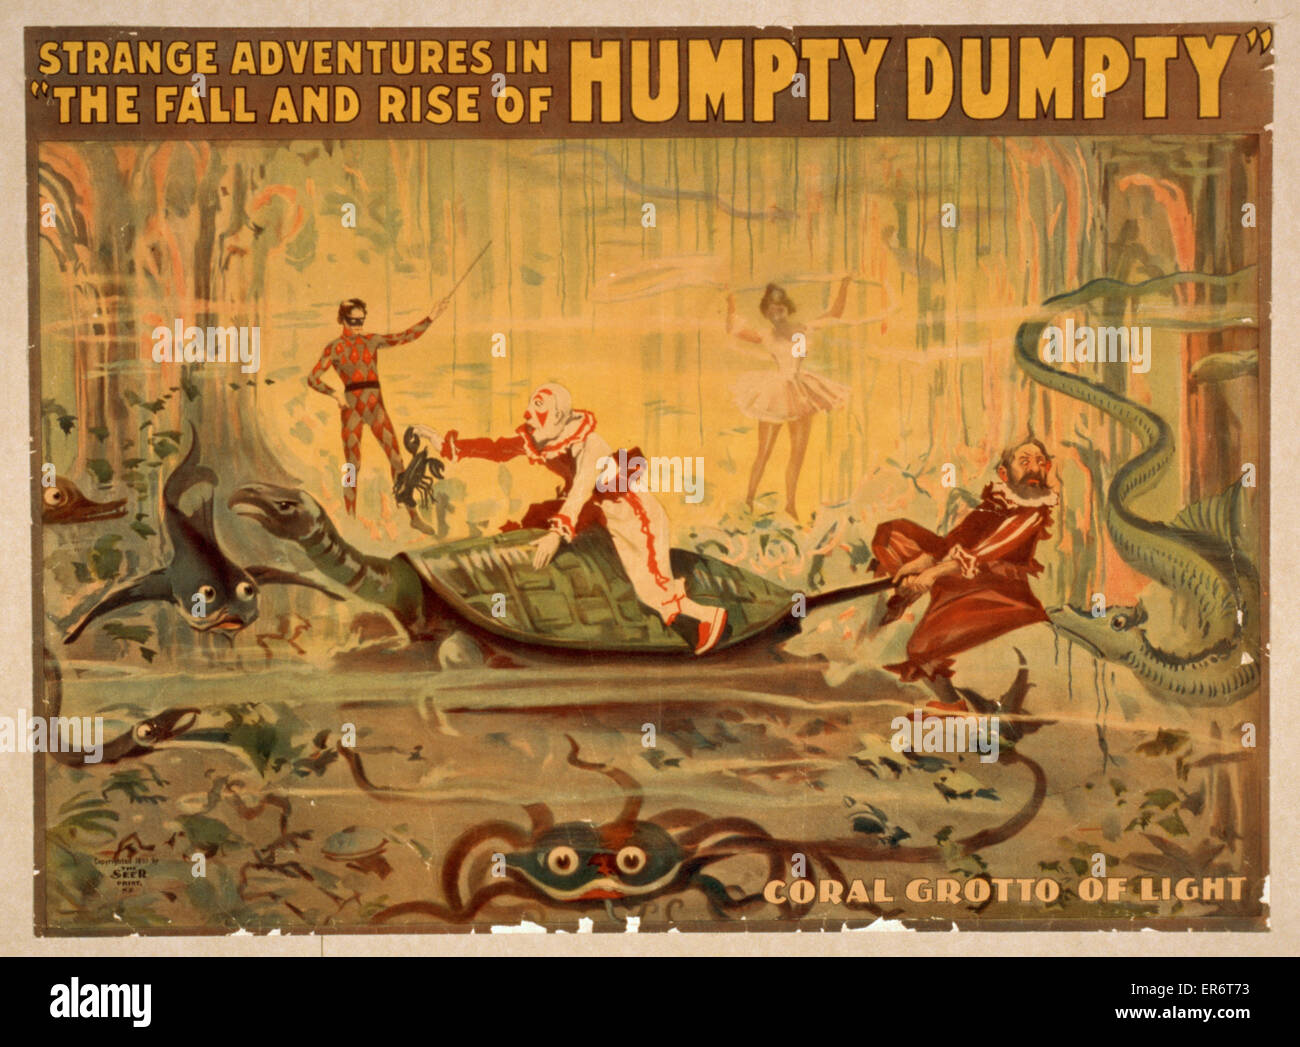 Strange adventures in The fall and rise of Humpty Dumpty. Date c1899. Stock Photo